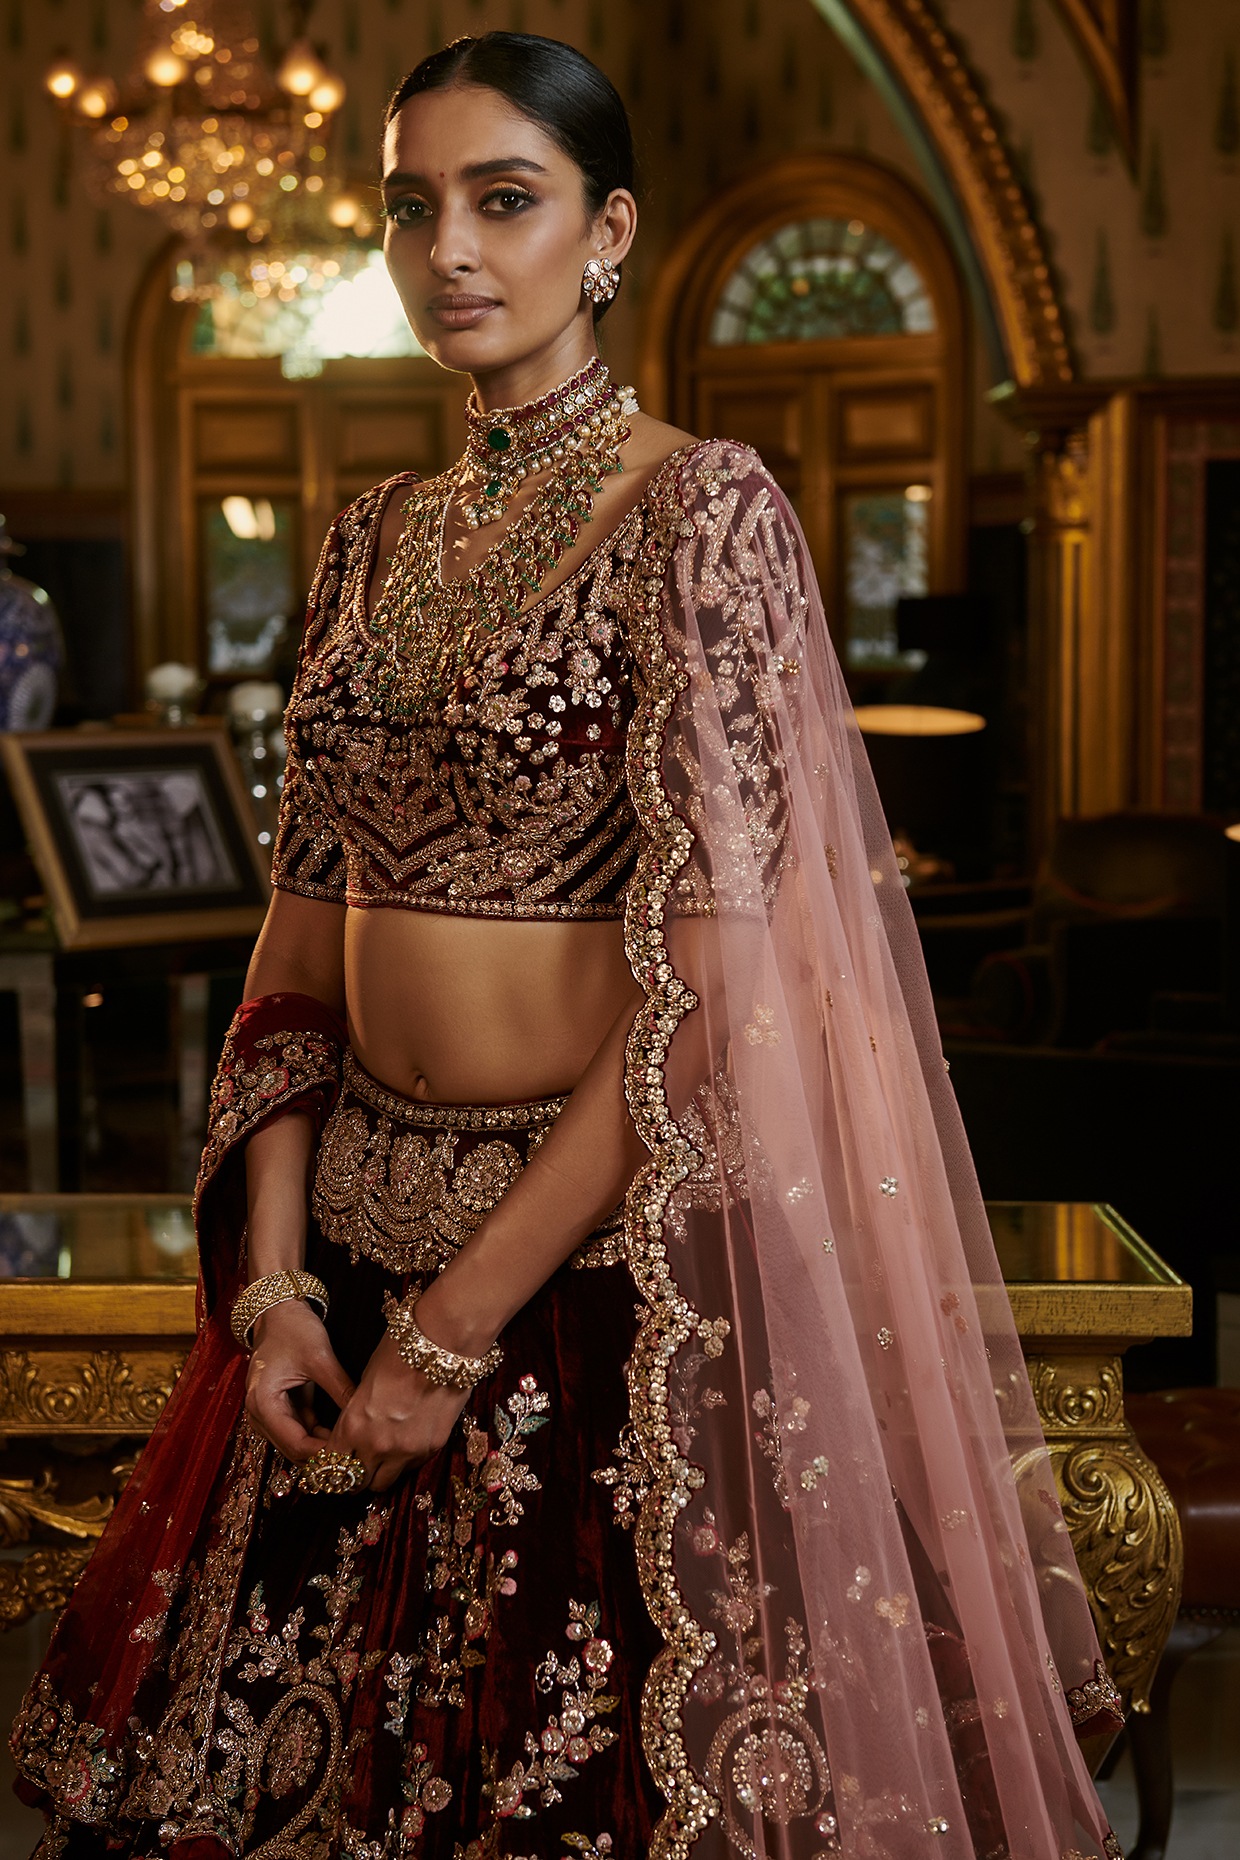 What colour lehengas would look good on a slight dark complexion bride for  an evening reception? - Quora